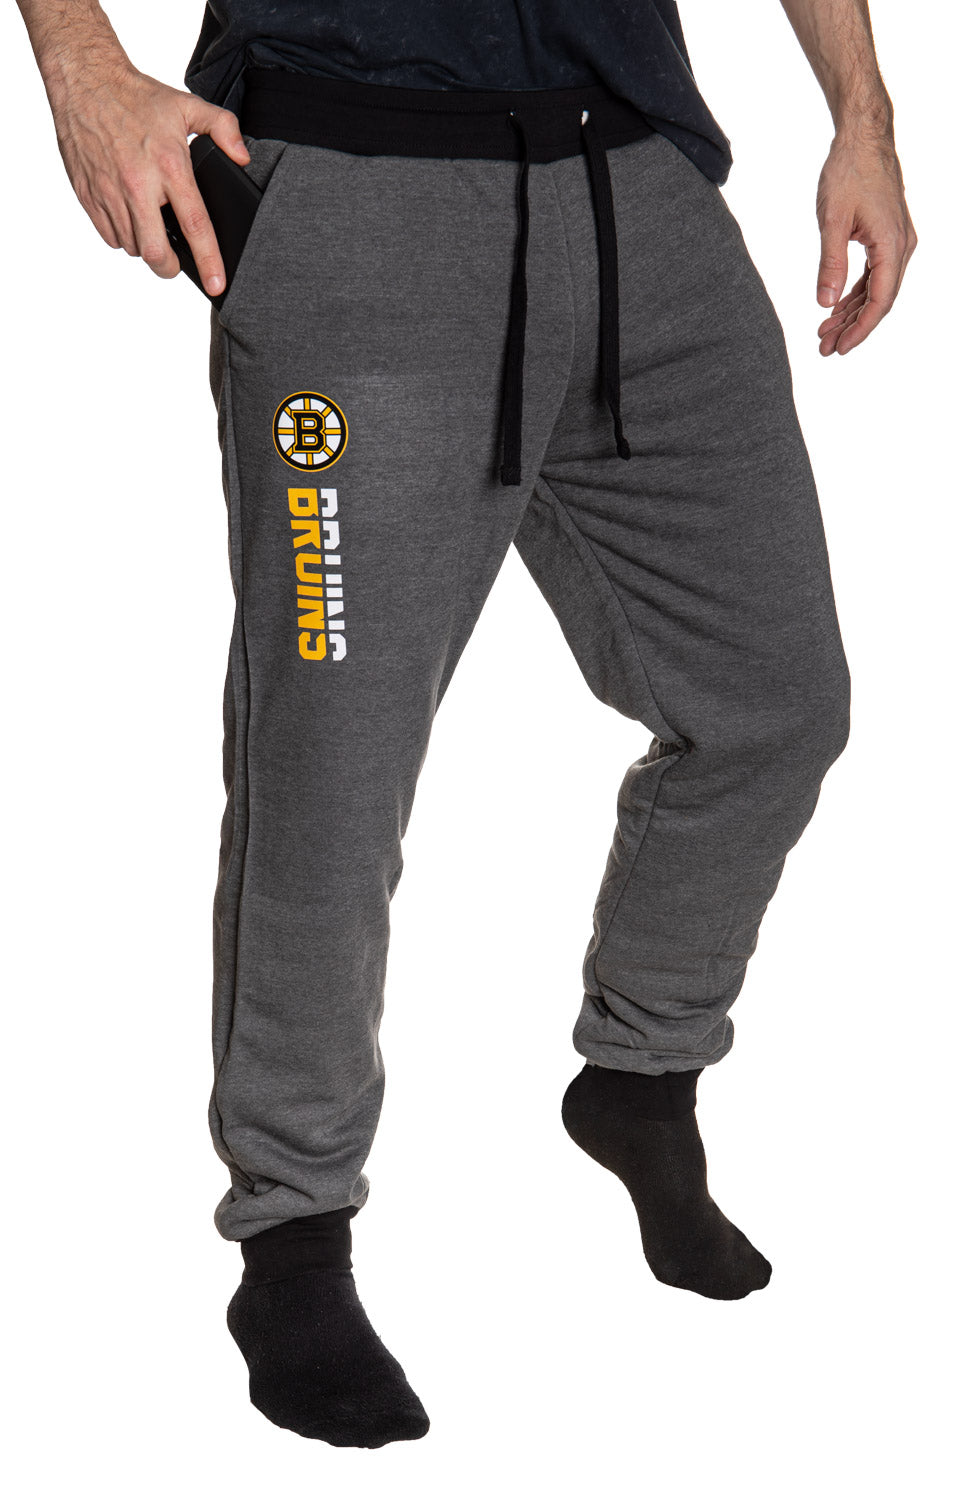 Boston Bruins NHL Unisex Sherpa Lined Warm Sweatpants with Pockets